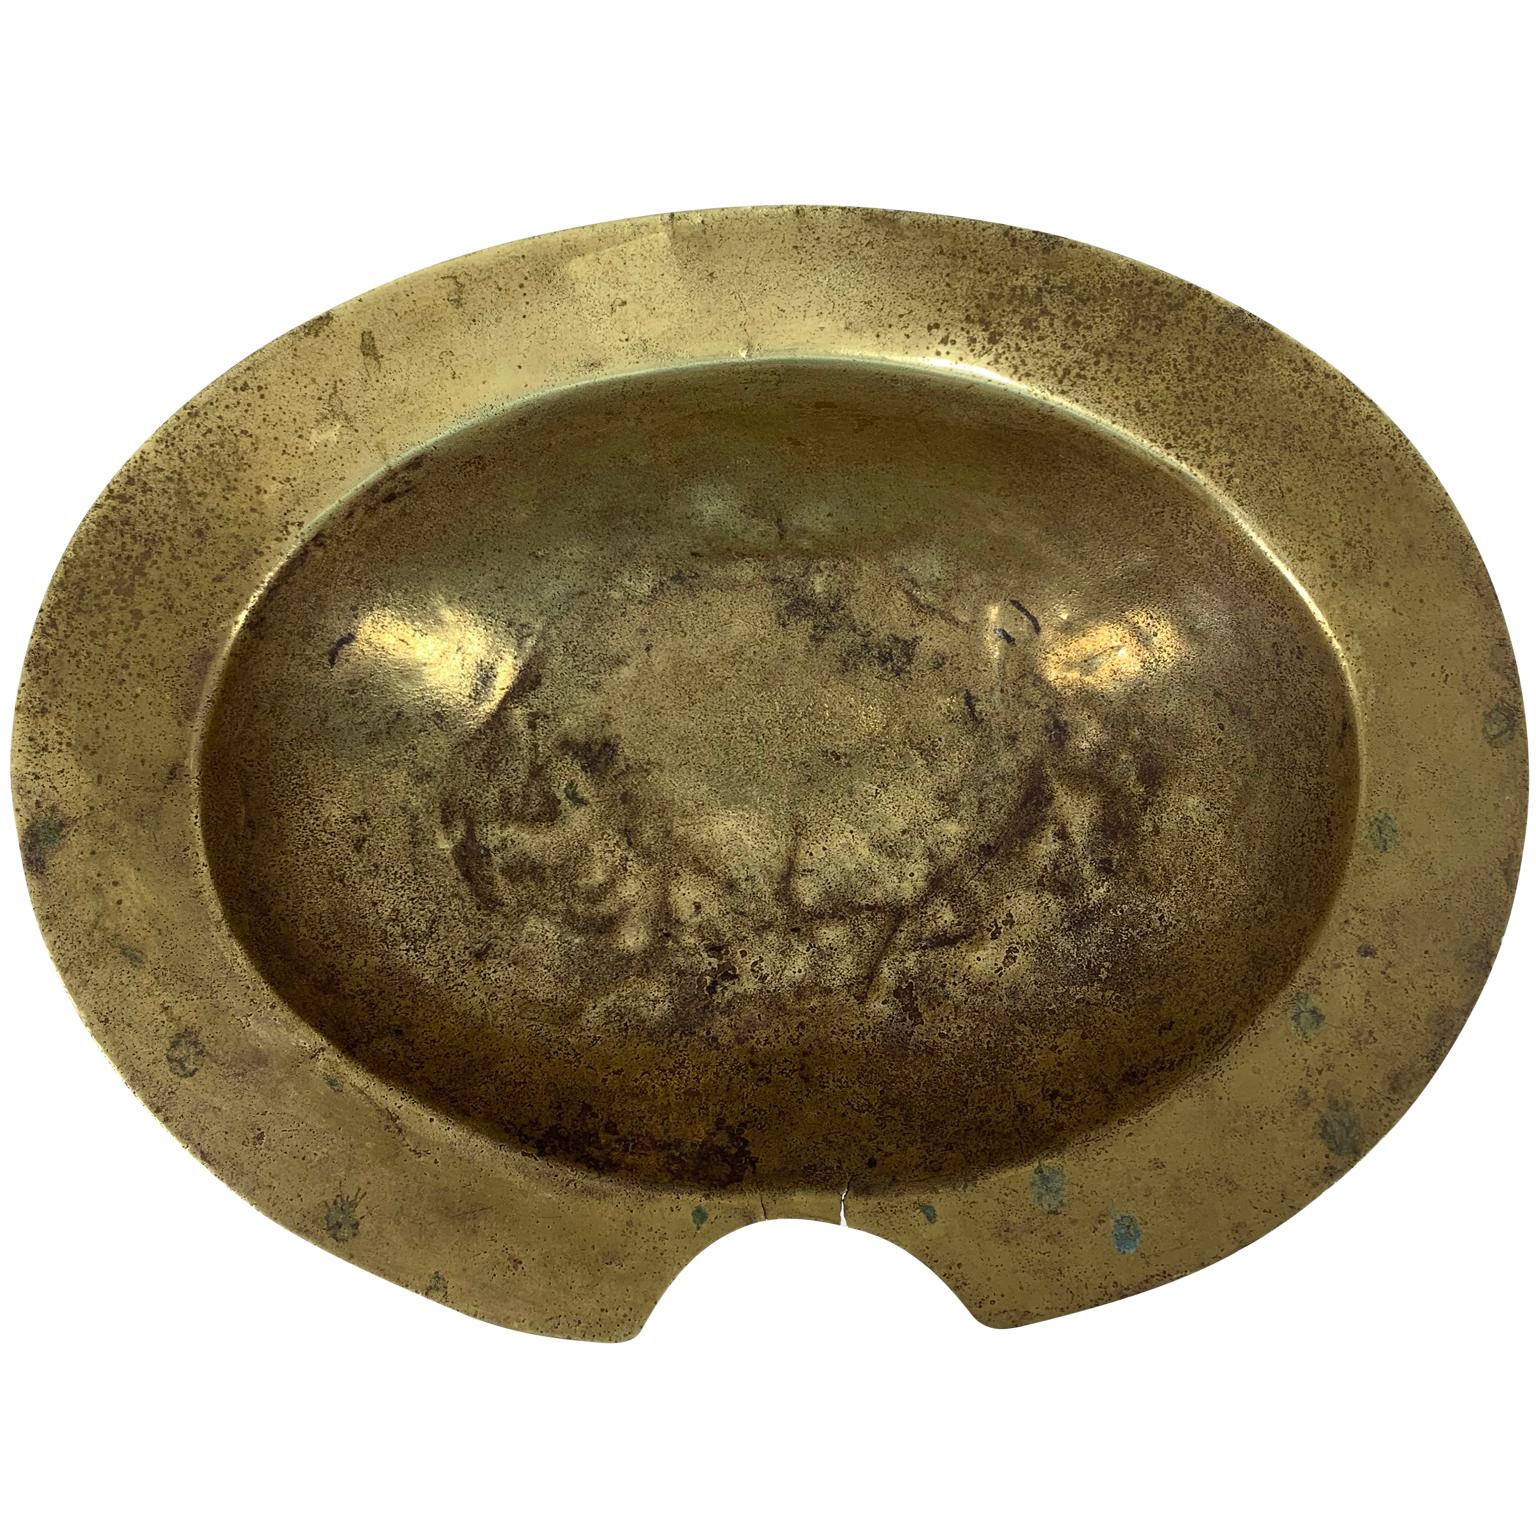 Early 19th European brass bowl.

This bowl was most likely used by a barber or for the macabre purpose of bloodletting.